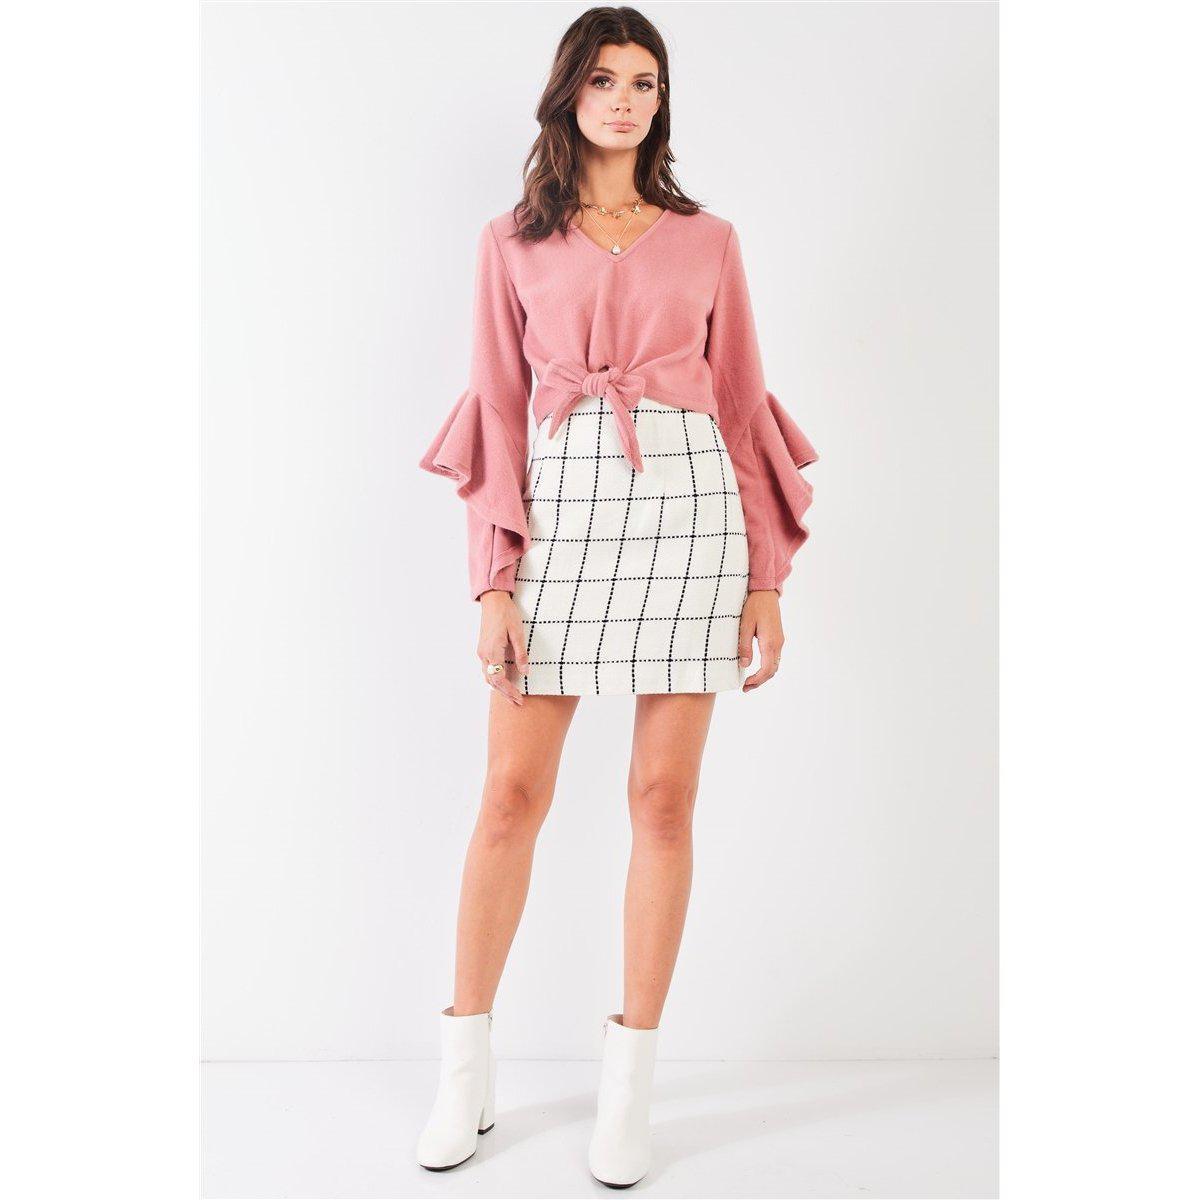 Fuzzy long ruffle sleeve v-neck self-tie front detail cropped top-Clothing Tops-NXTLVLNYC